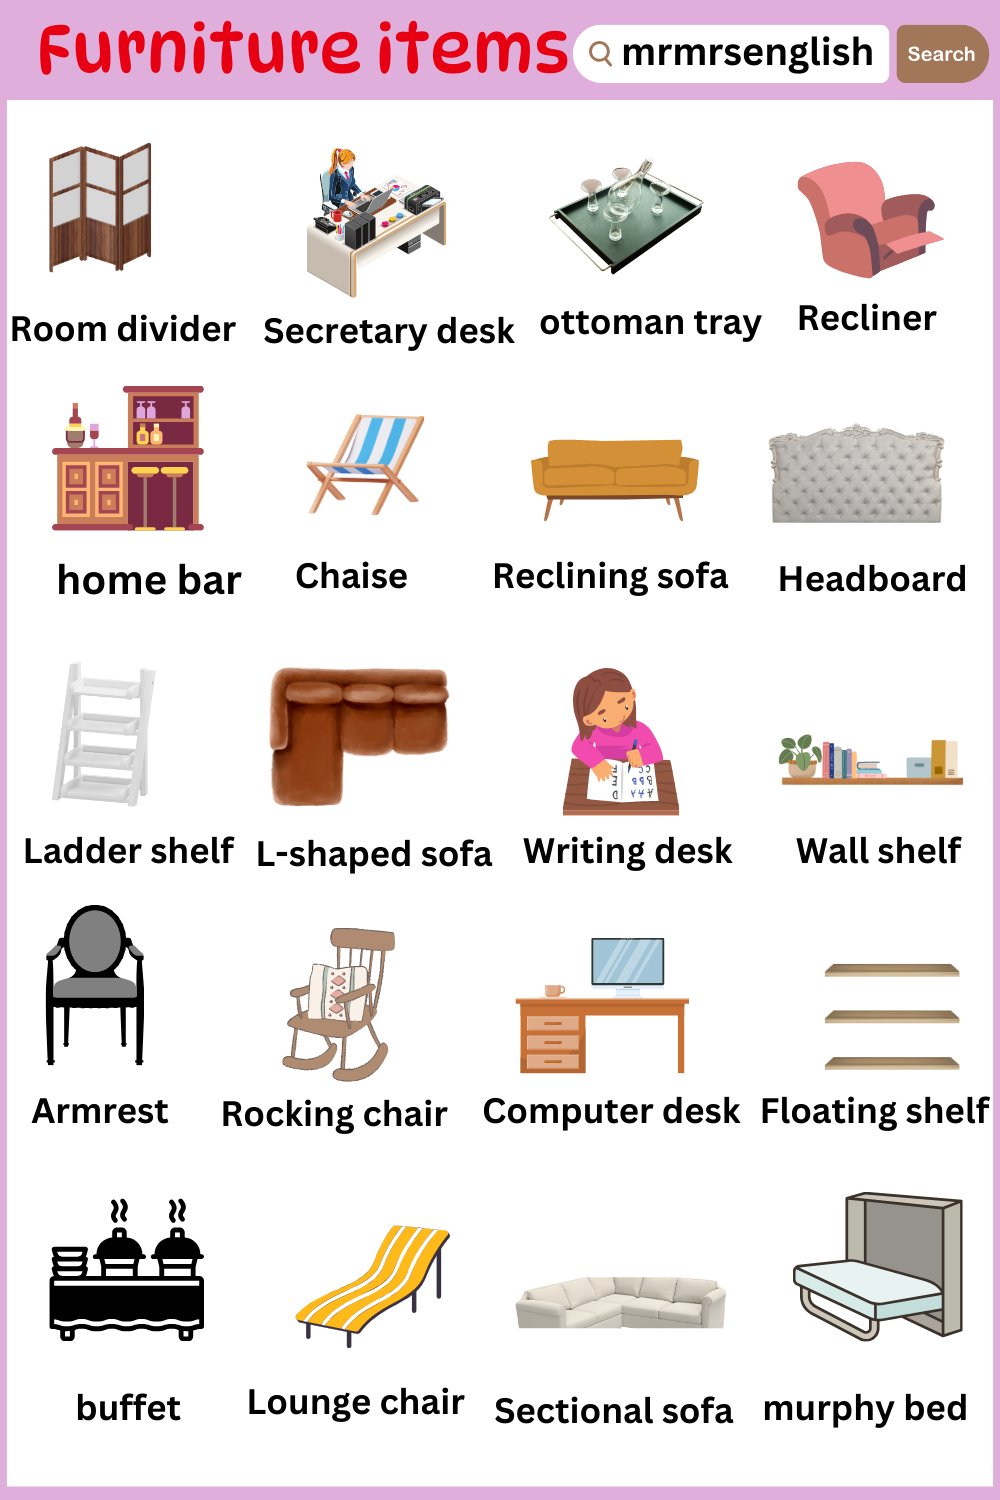 Furniture items pictures and names